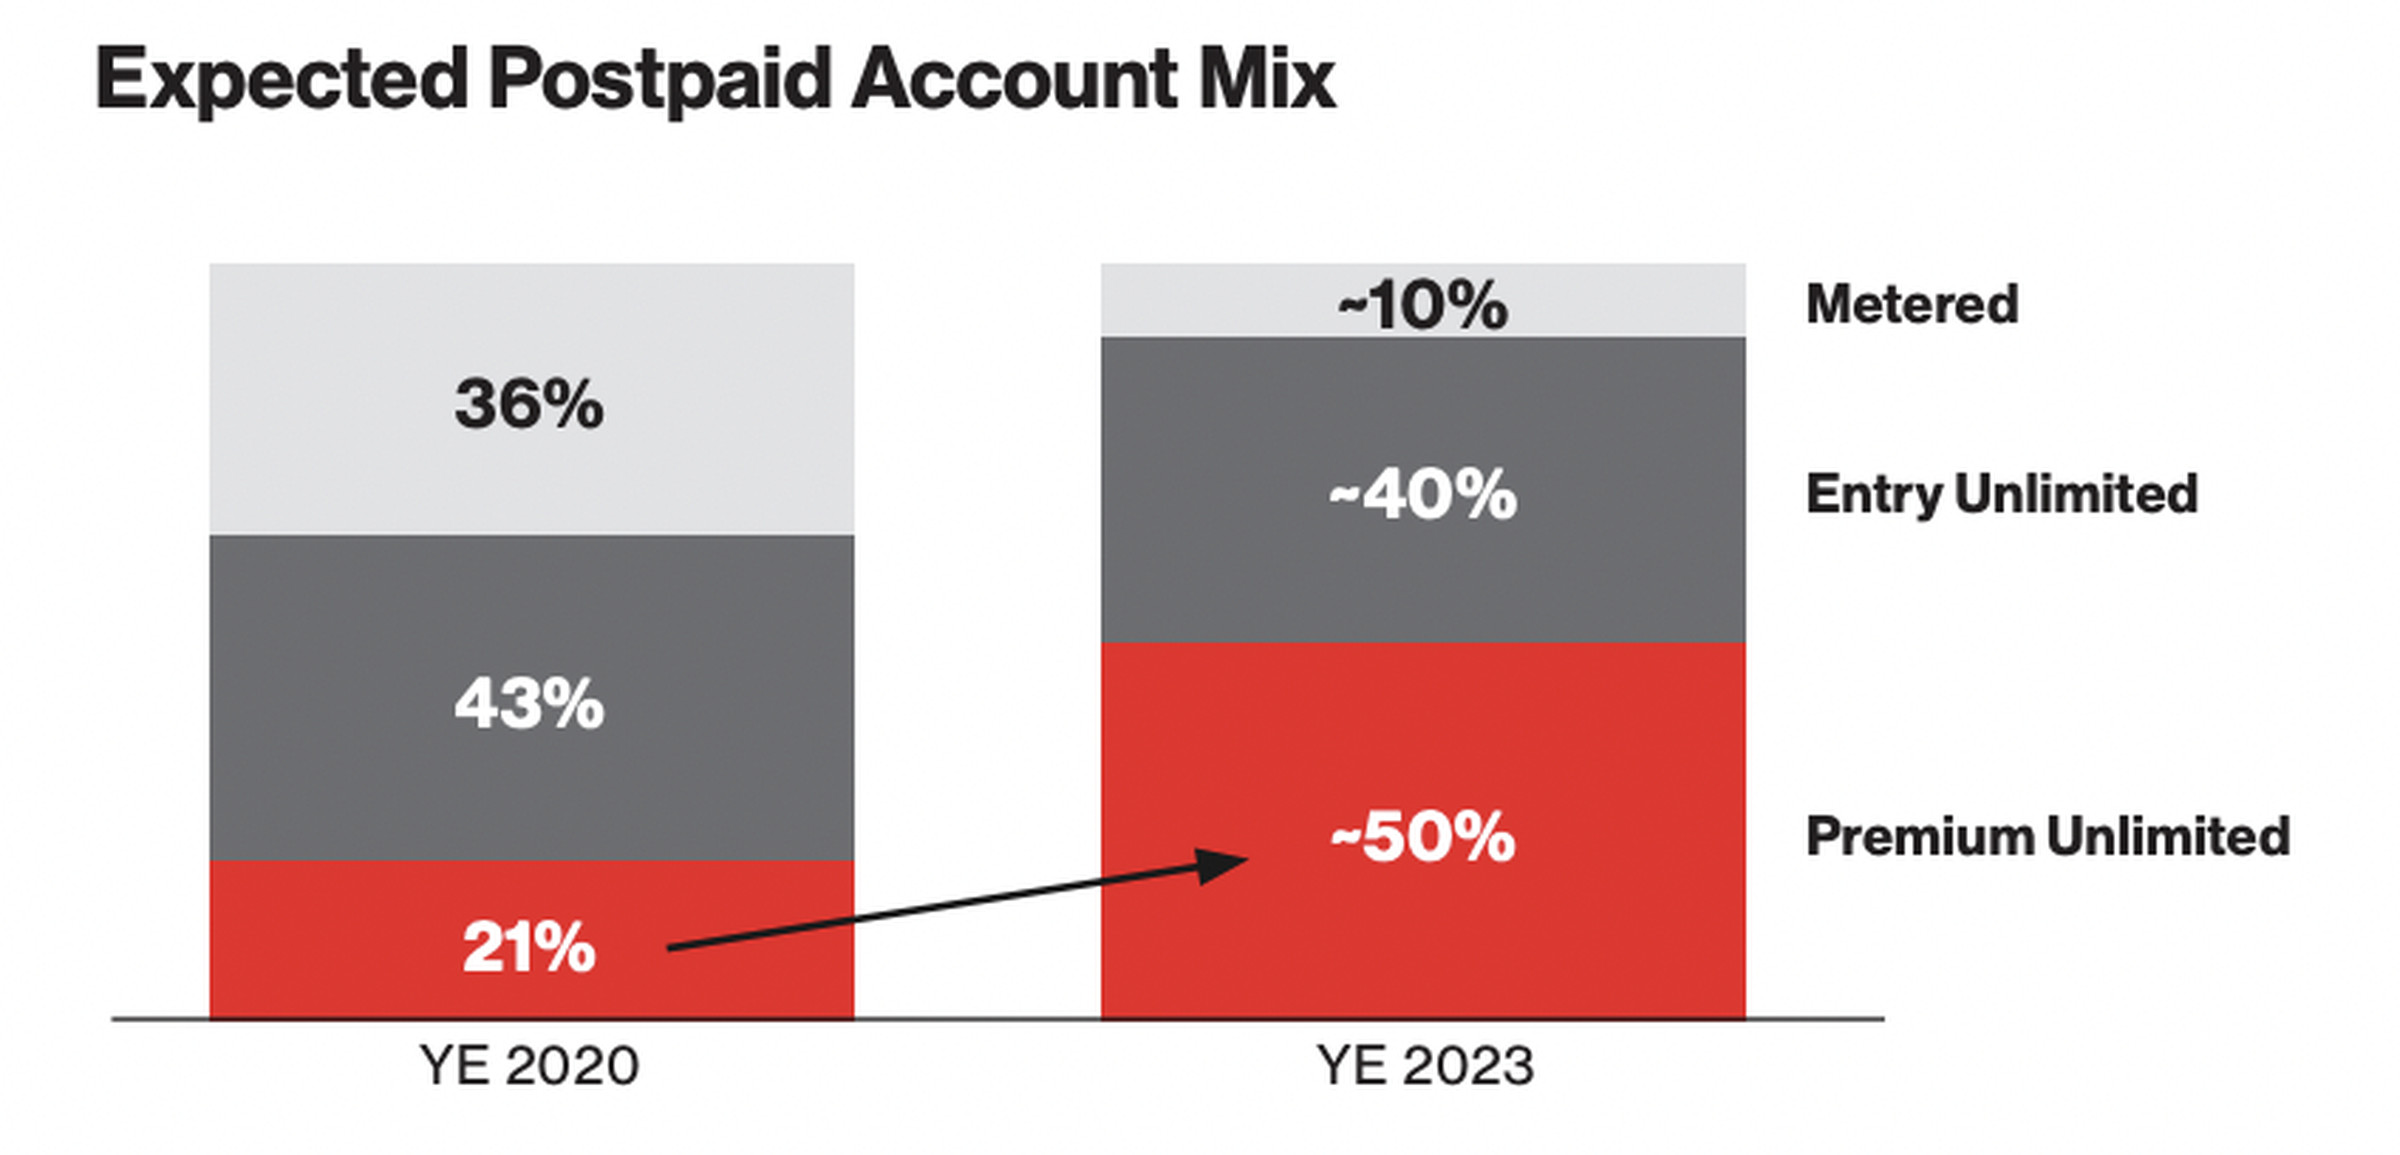 Verizon predicts premium unlimited plans will make up 50% of its postpaid account mix by the end of 2023.